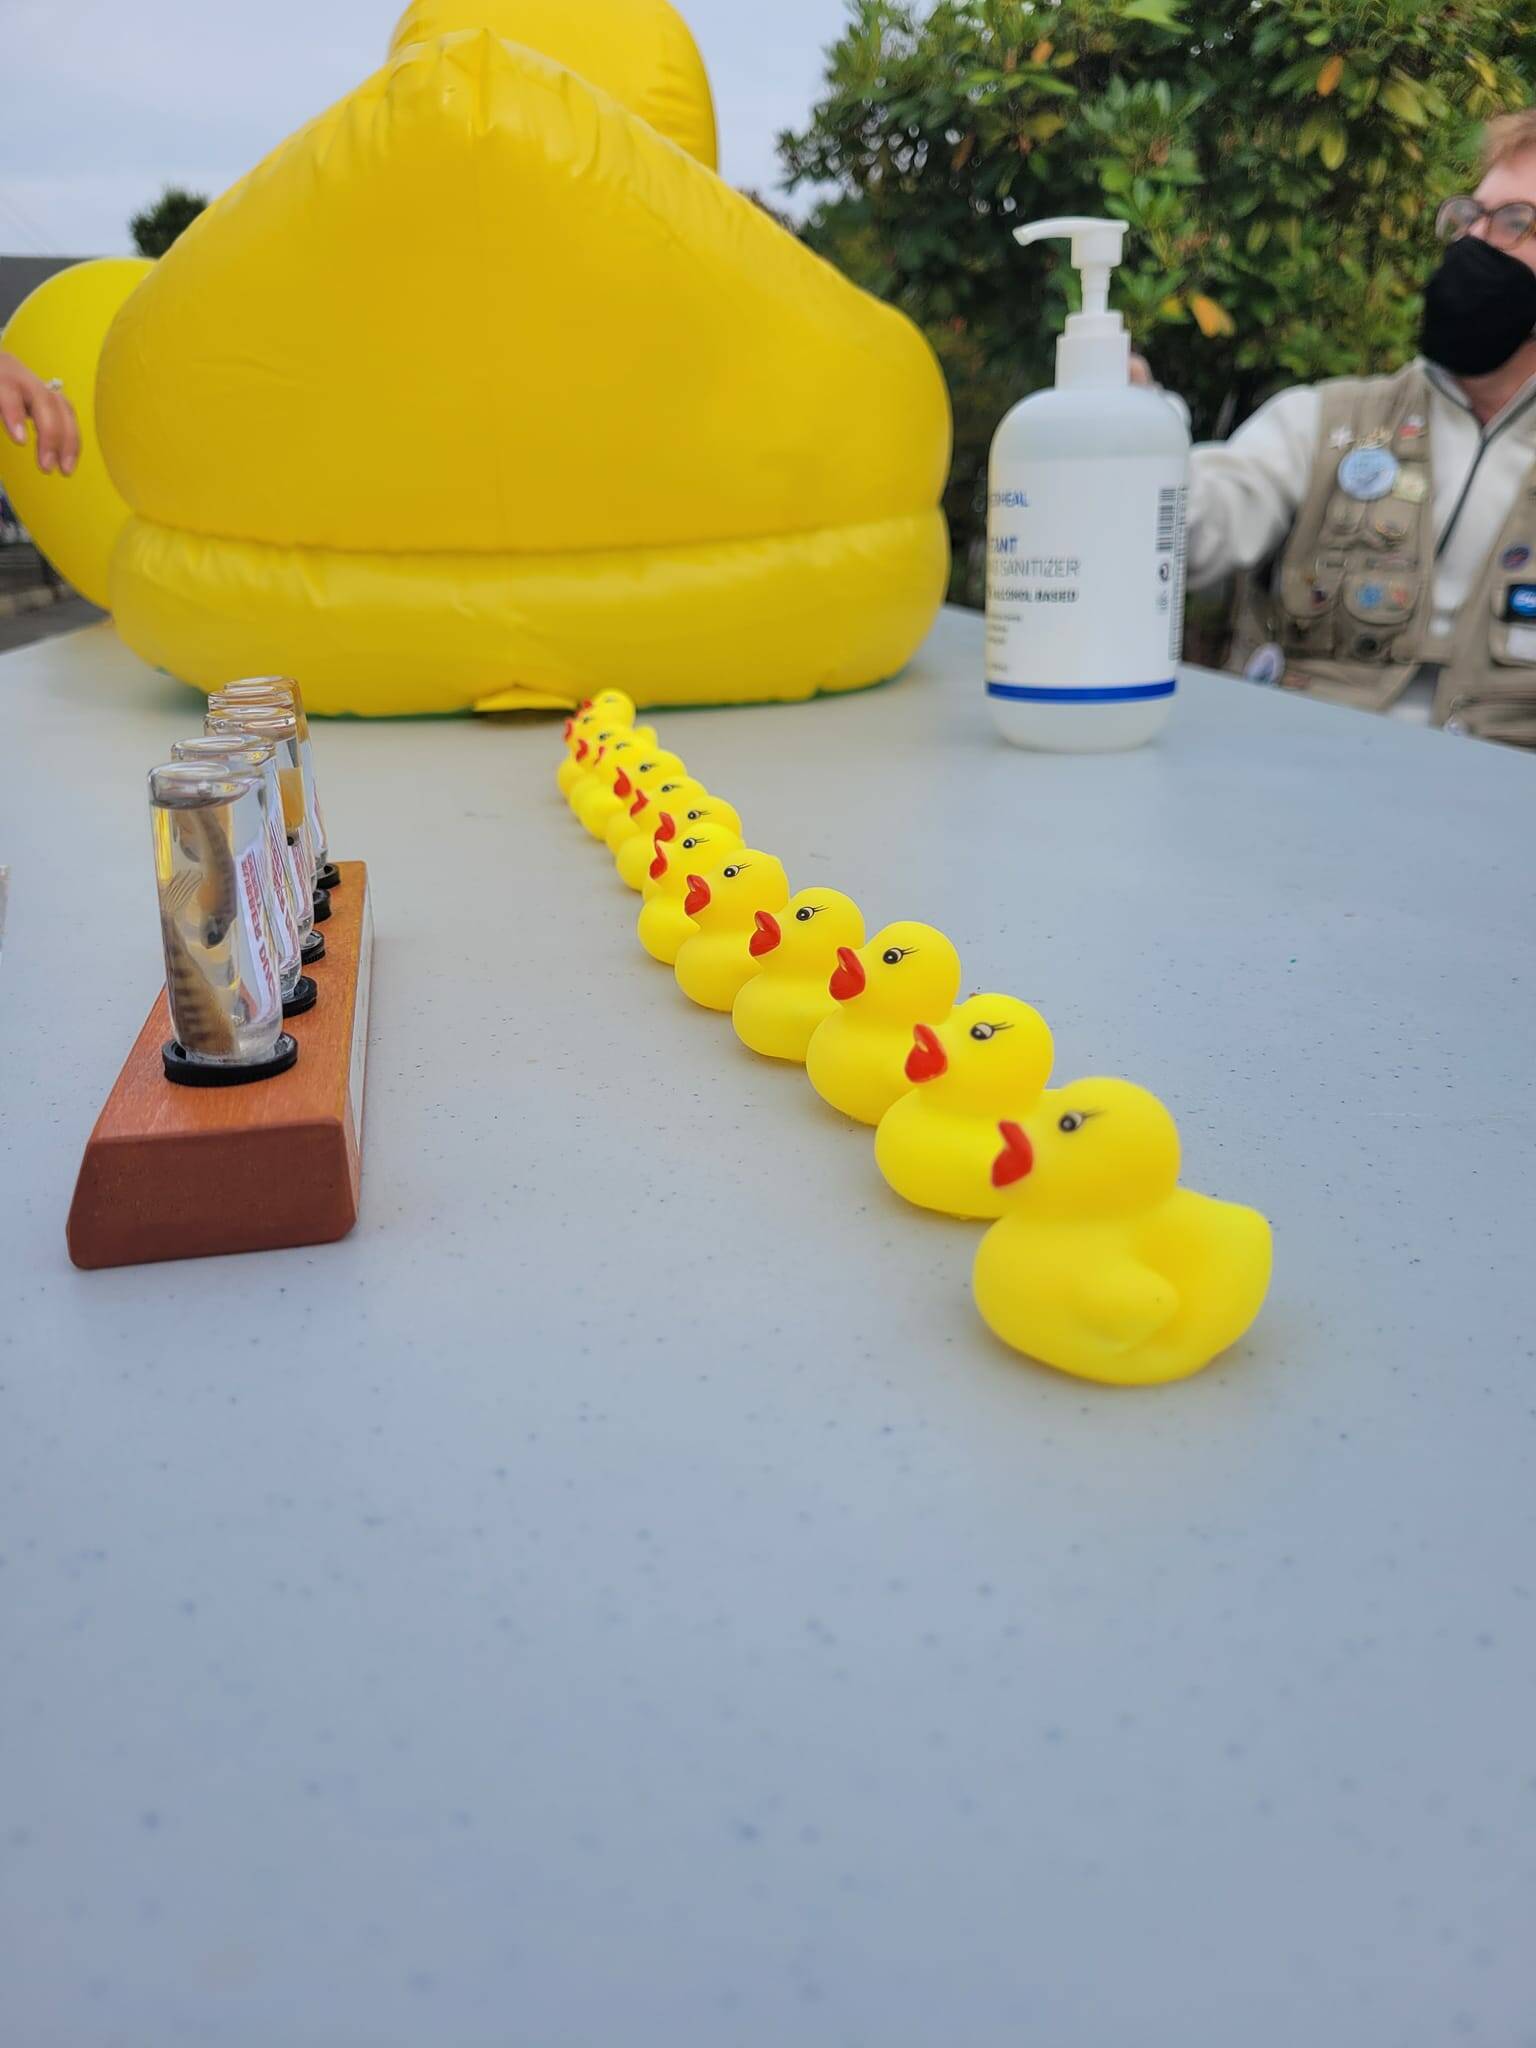 Rubber ducks lined up and ready for the salmon raceway. (Photo courtesy of William Shaw)